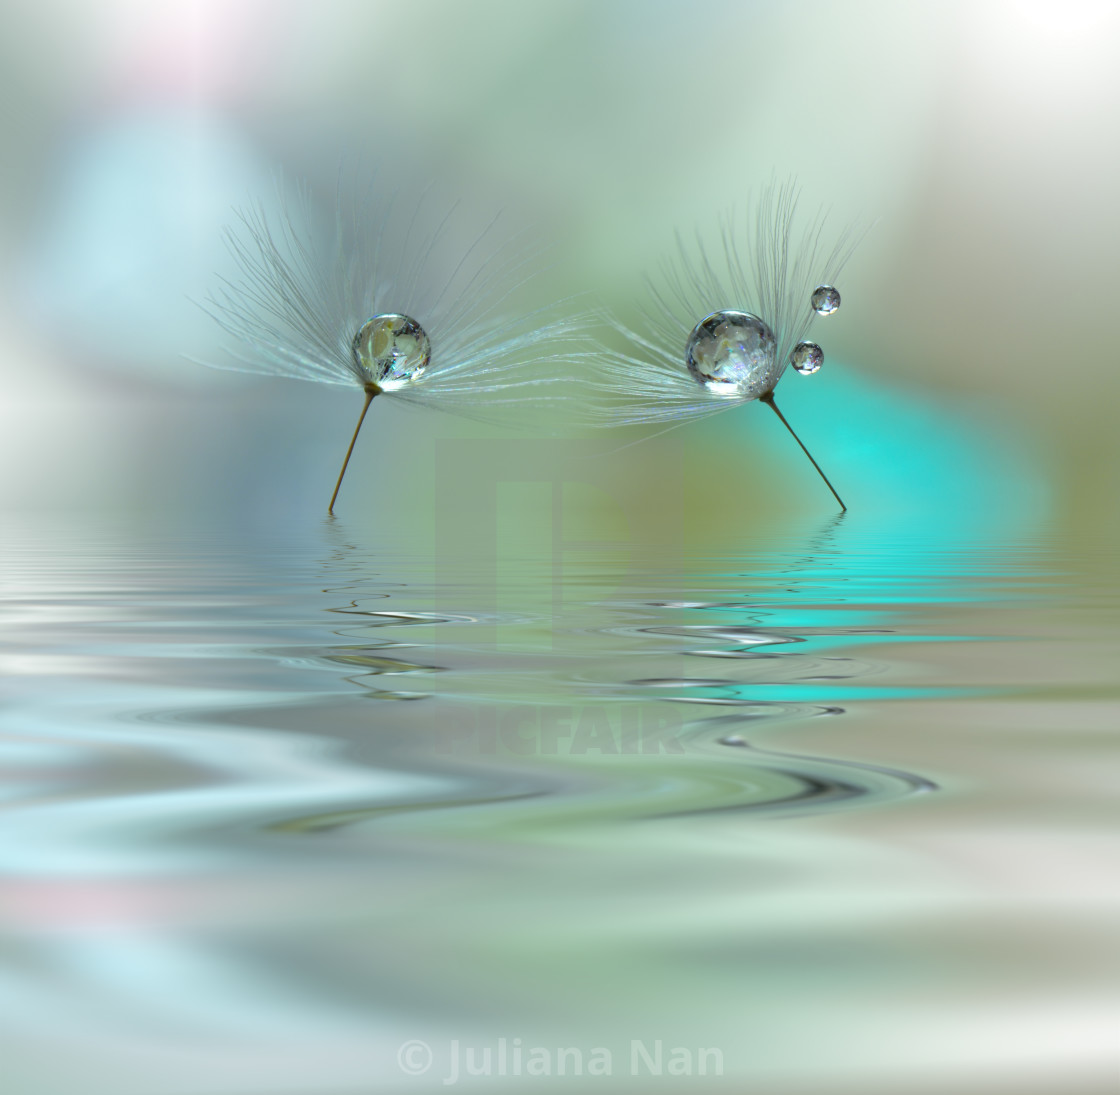 Abstract Macro Photo With Water Drops - Beautiful Water Drop On Flowers - HD Wallpaper 